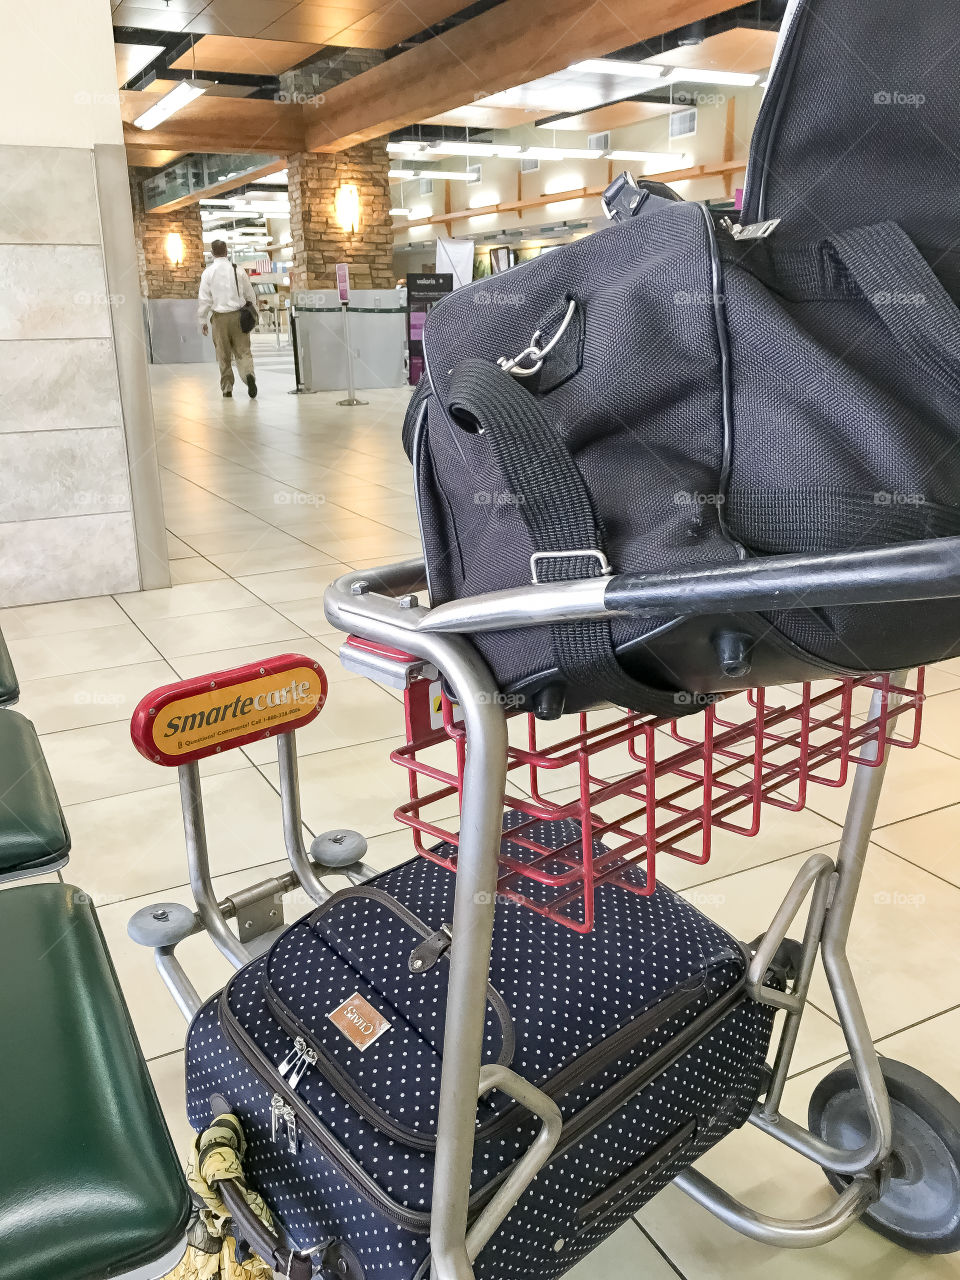 Luggage on luggage cart inside airport